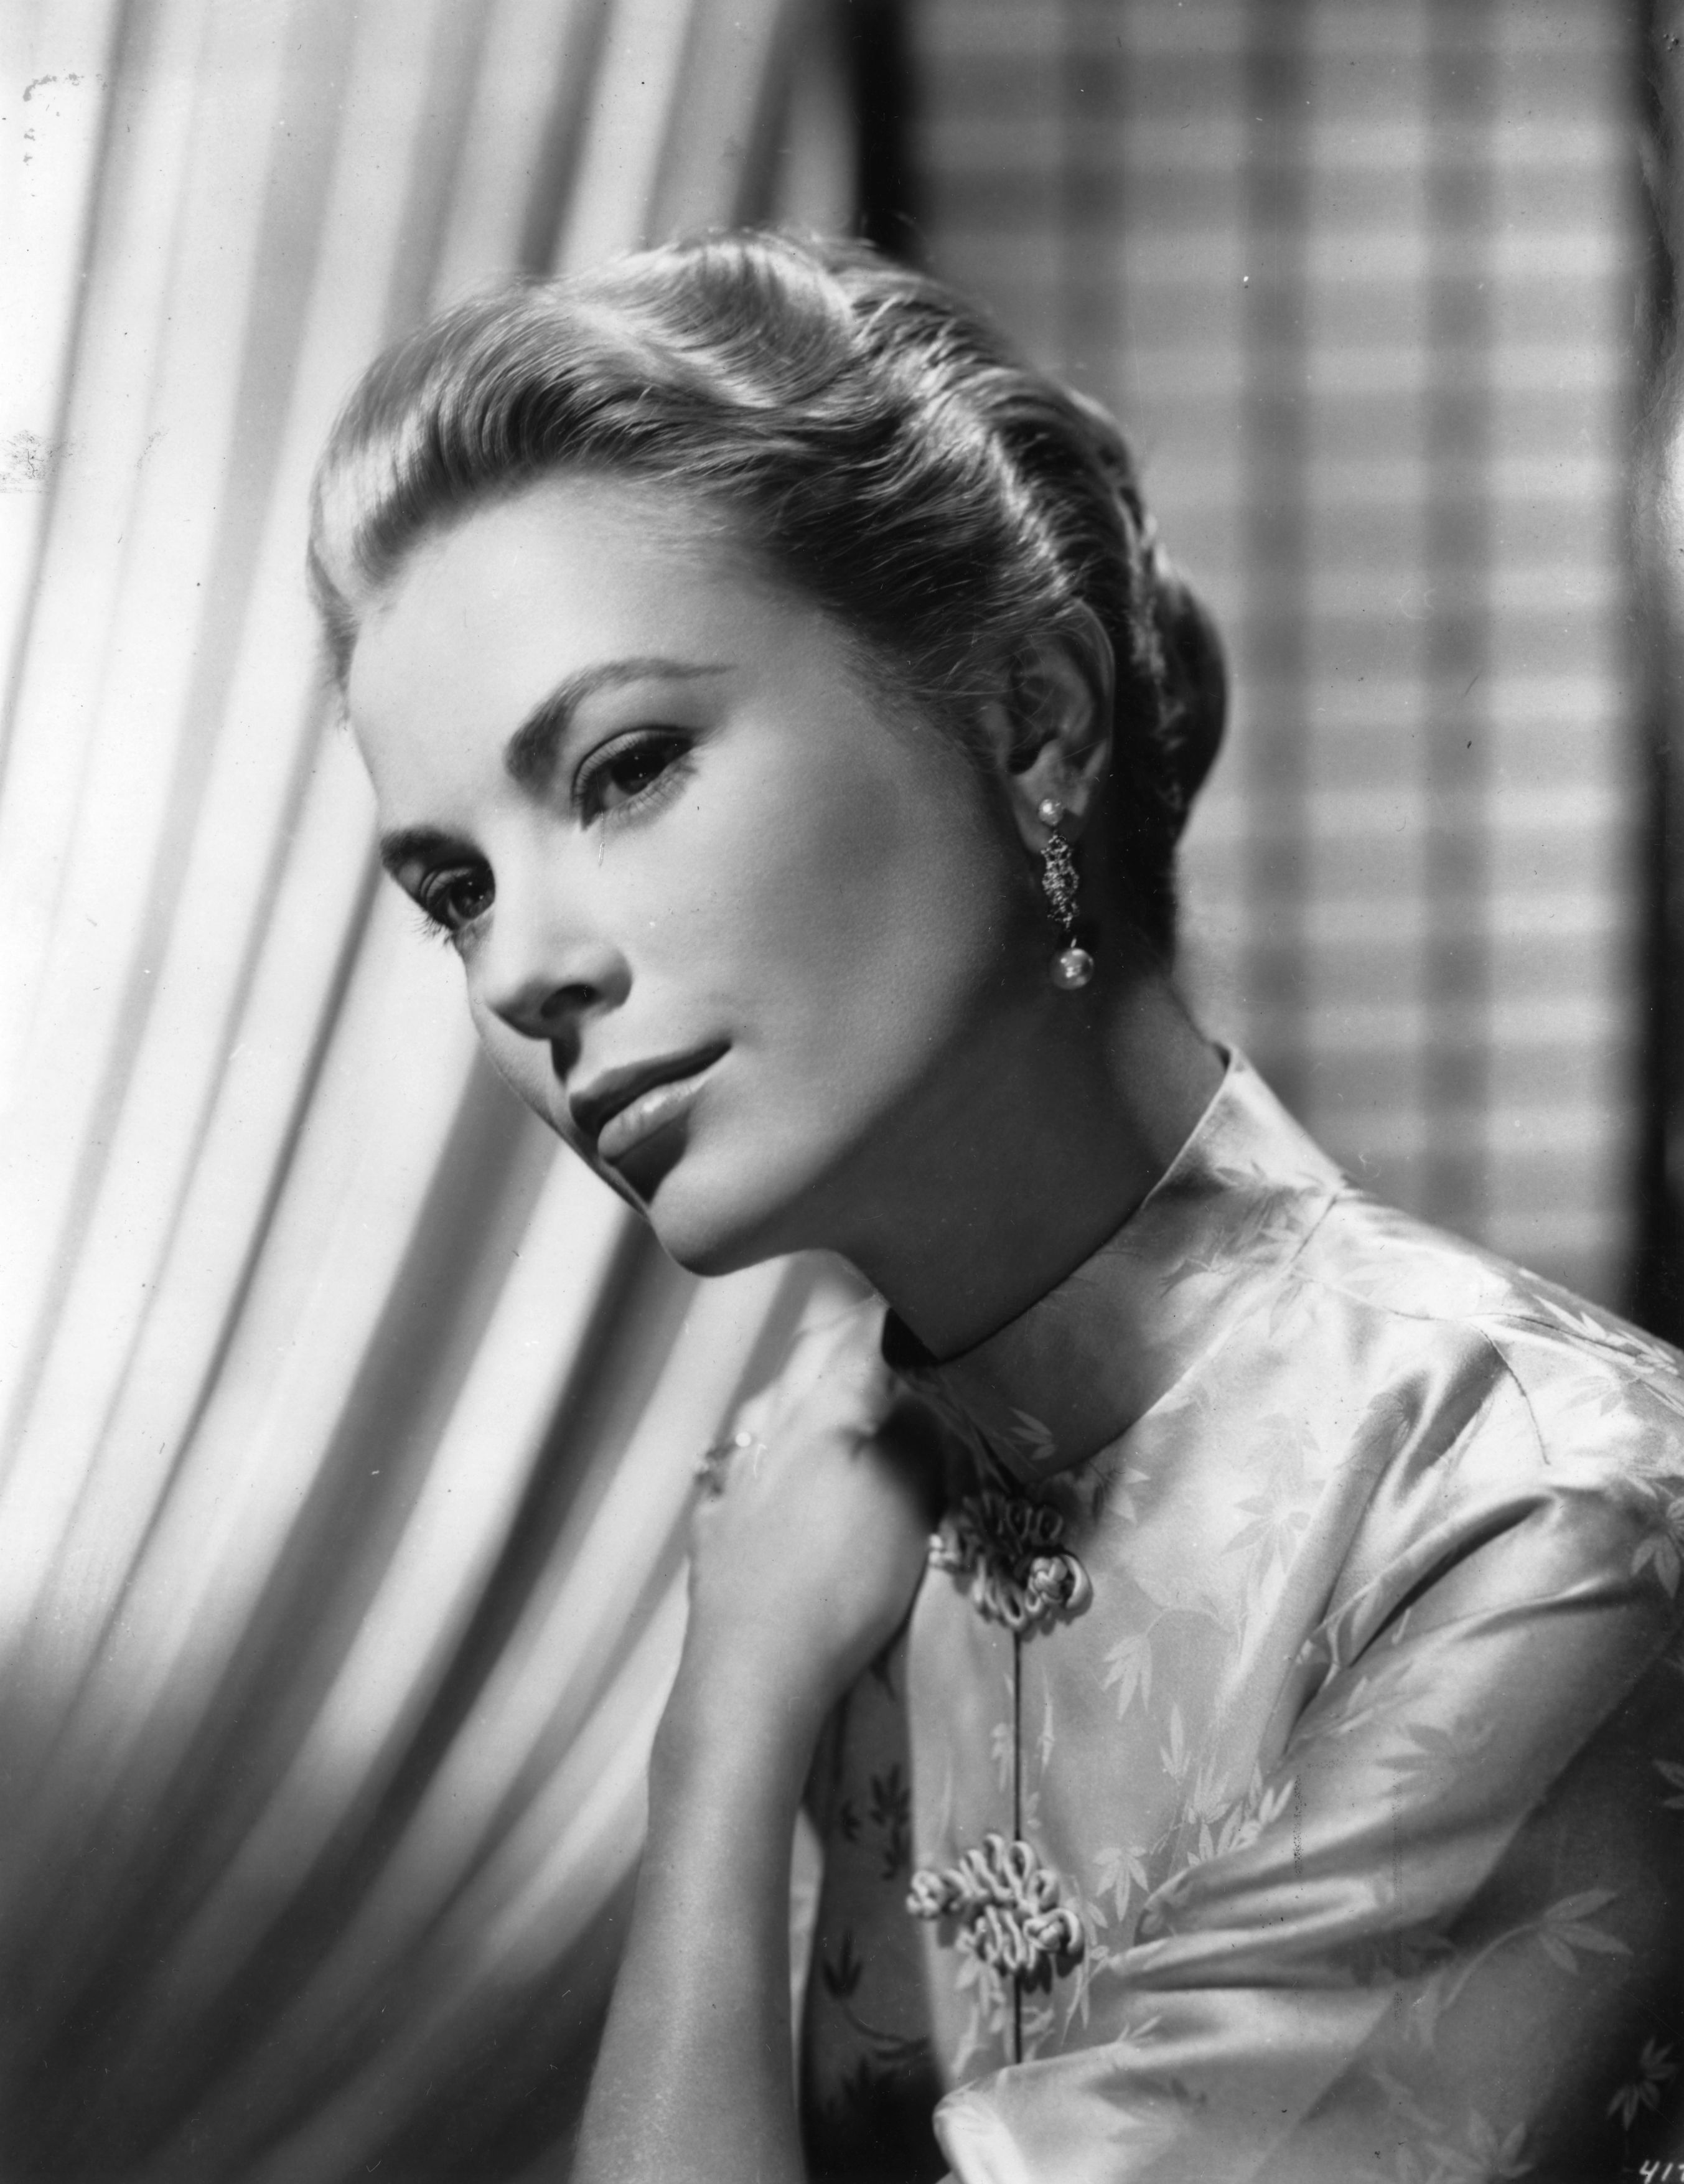 Grace Patricia Kelly, later known as Princess Grace of Monaco, in a black-and-white image on March 8, 1956. | Source: Keystone/Getty Images